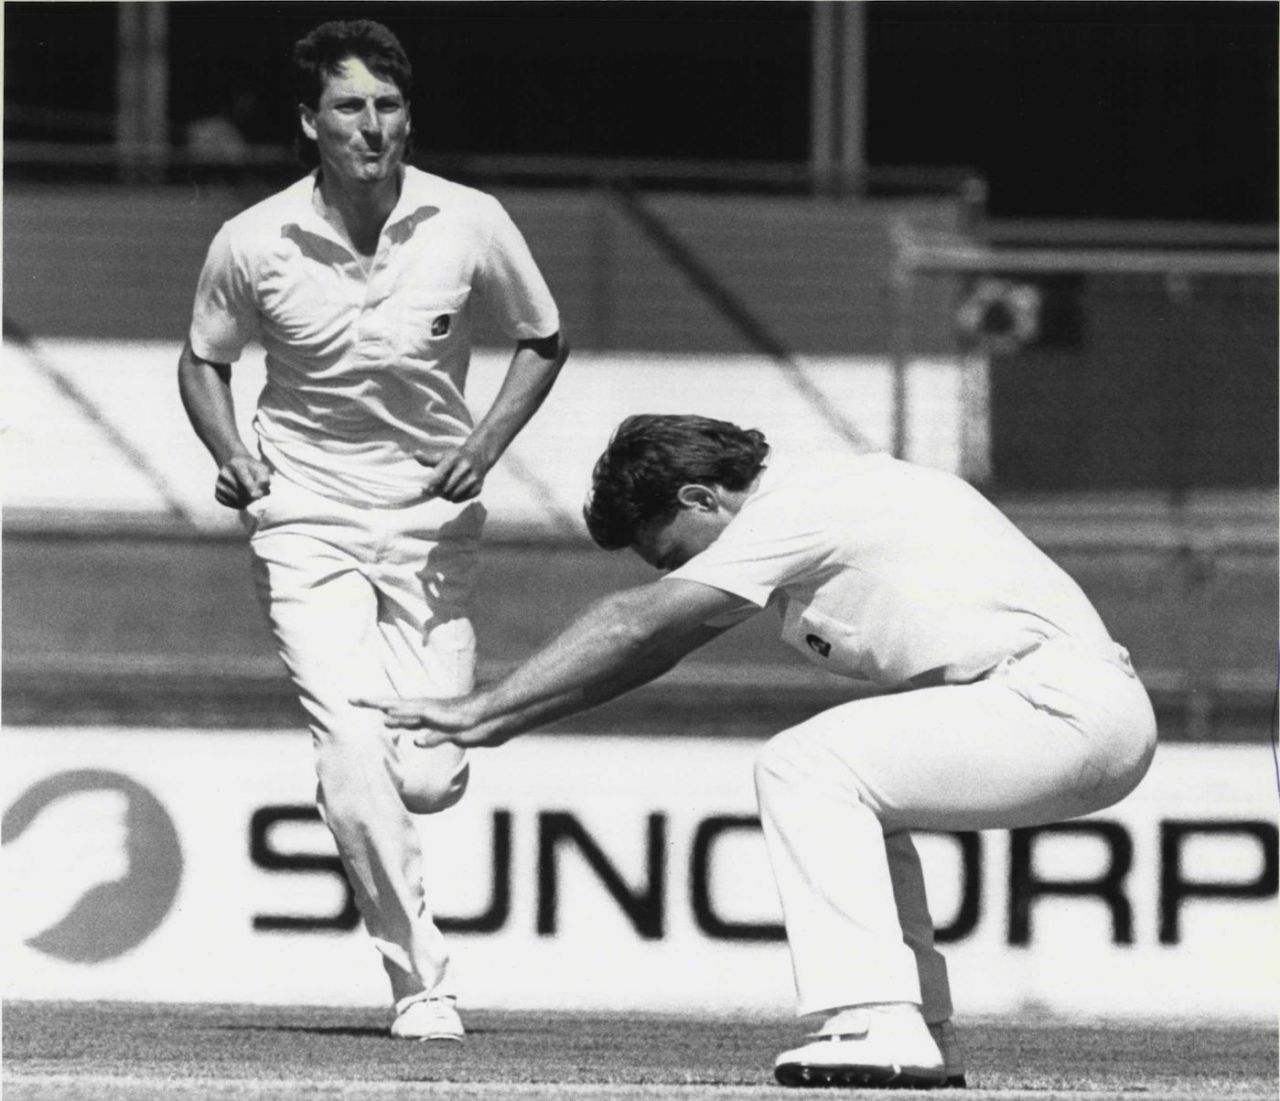 Danny Morrison bows to Allan Border as he leaves the ground after being dismissed, Australia v New Zealand, 1st Test, 2nd day, Brisbane, Dec 5, 1987